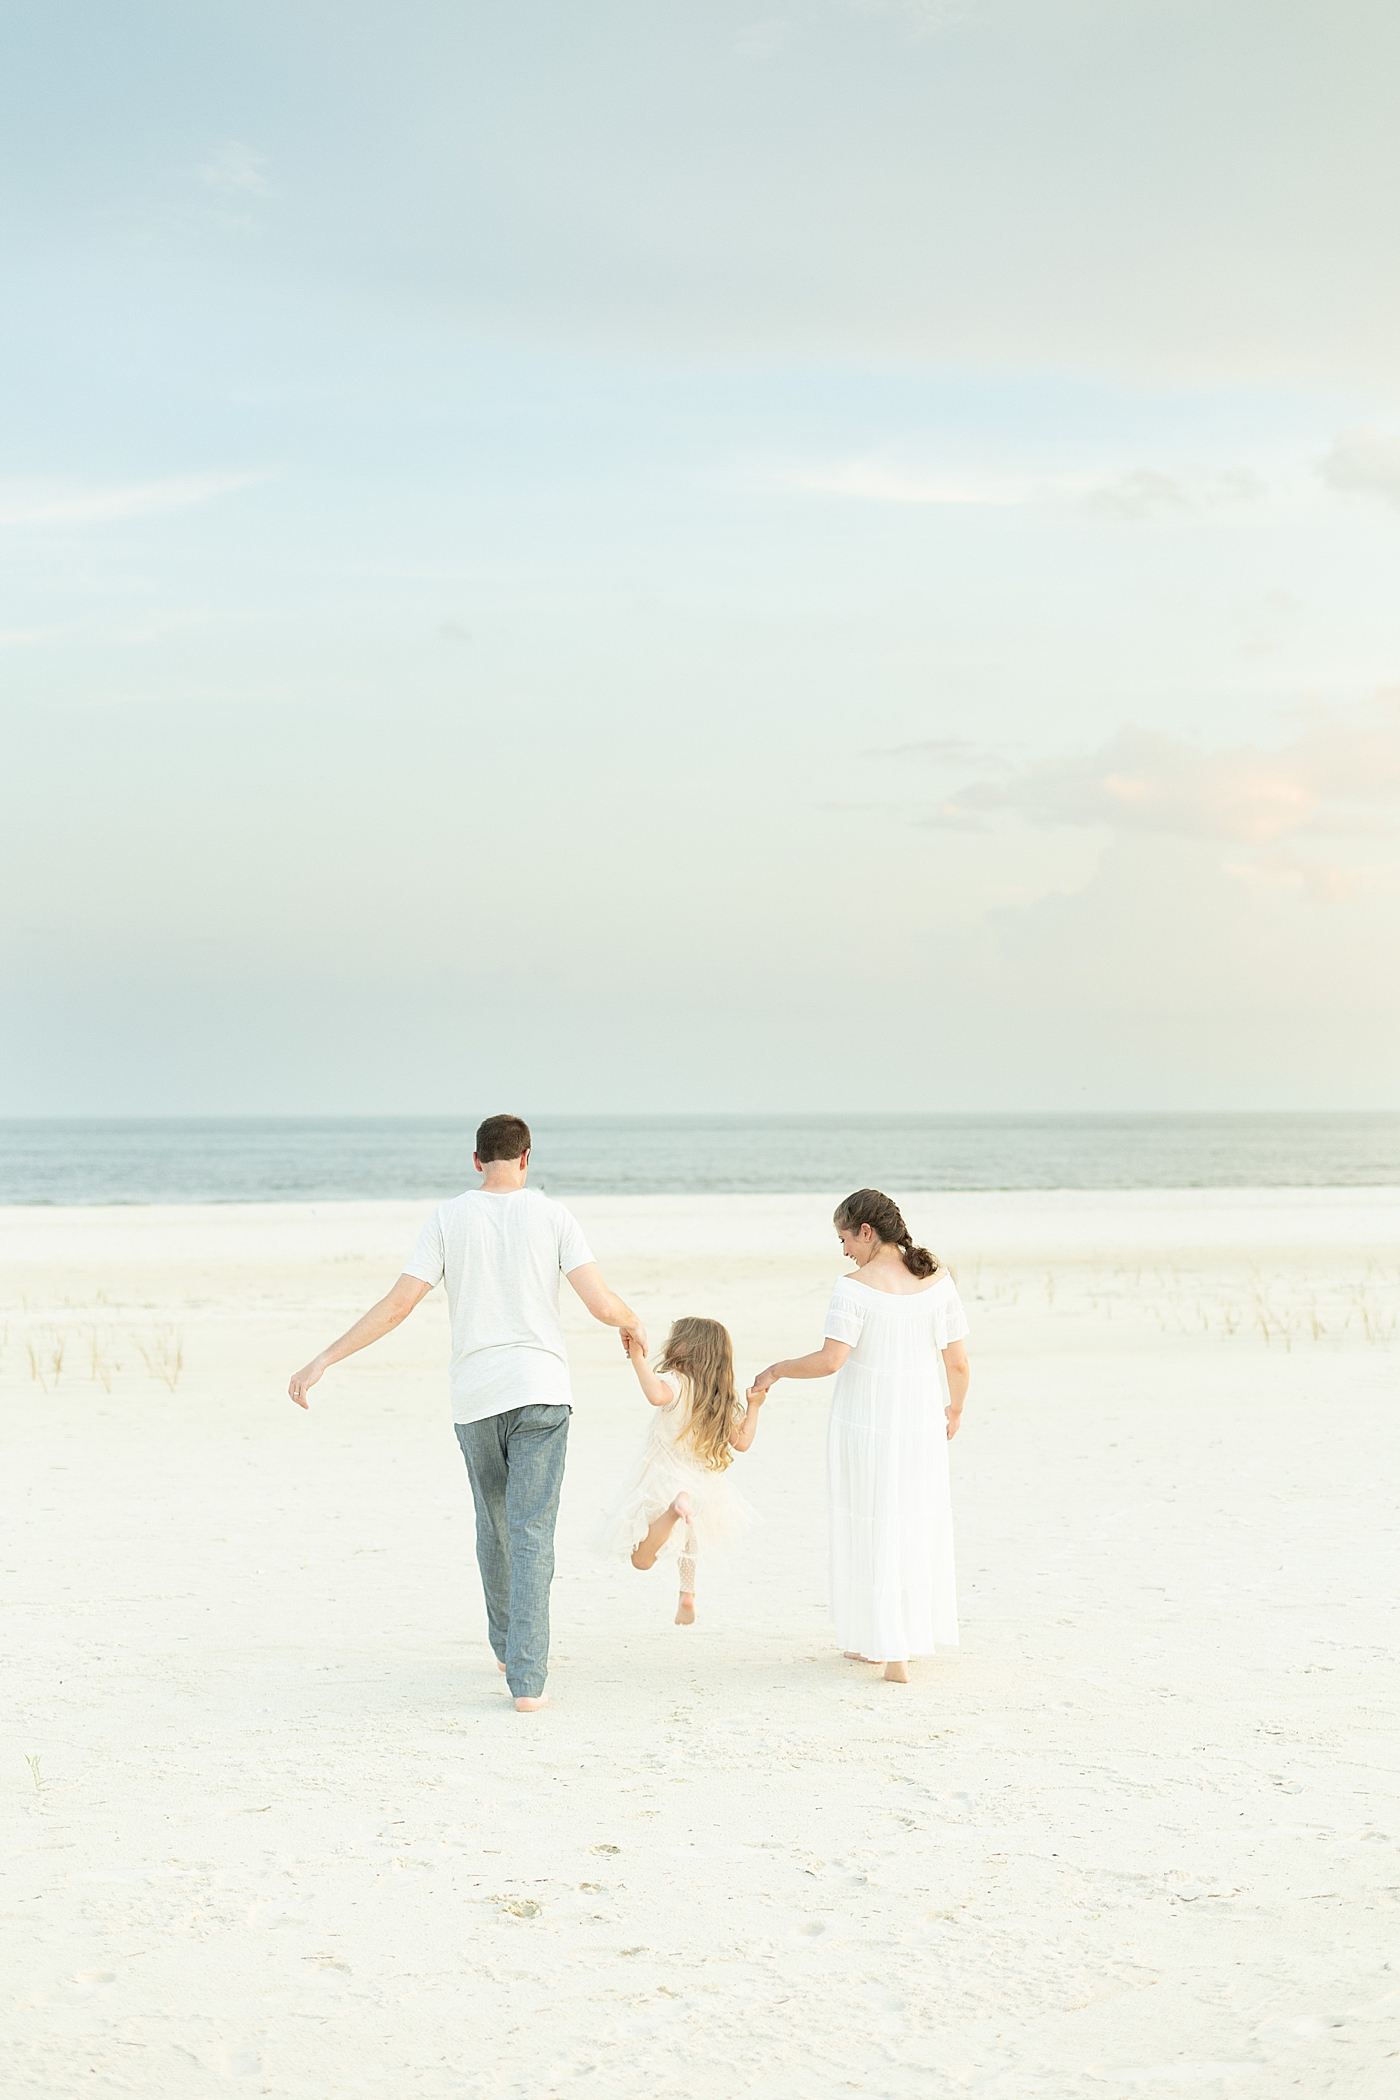 Family walking on the beach. Photo by Little Sunshine Photography.